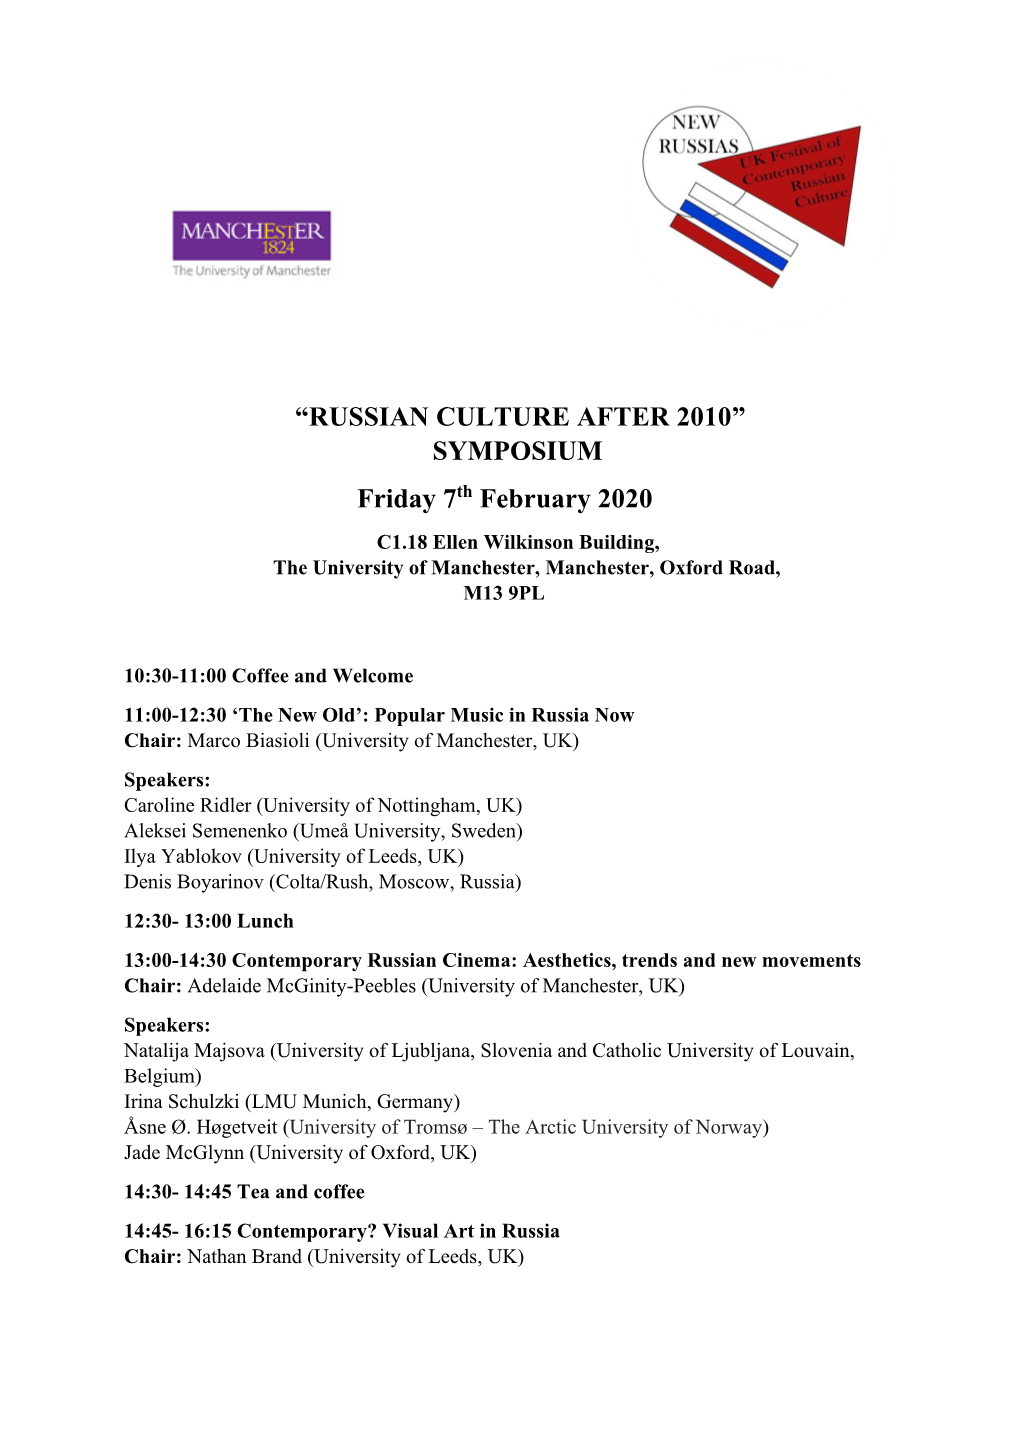 RUSSIAN CULTURE AFTER 2010” SYMPOSIUM Friday 7Th February 2020 C1.18 Ellen Wilkinson Building, the University of Manchester, Manchester, Oxford Road, M13 9PL